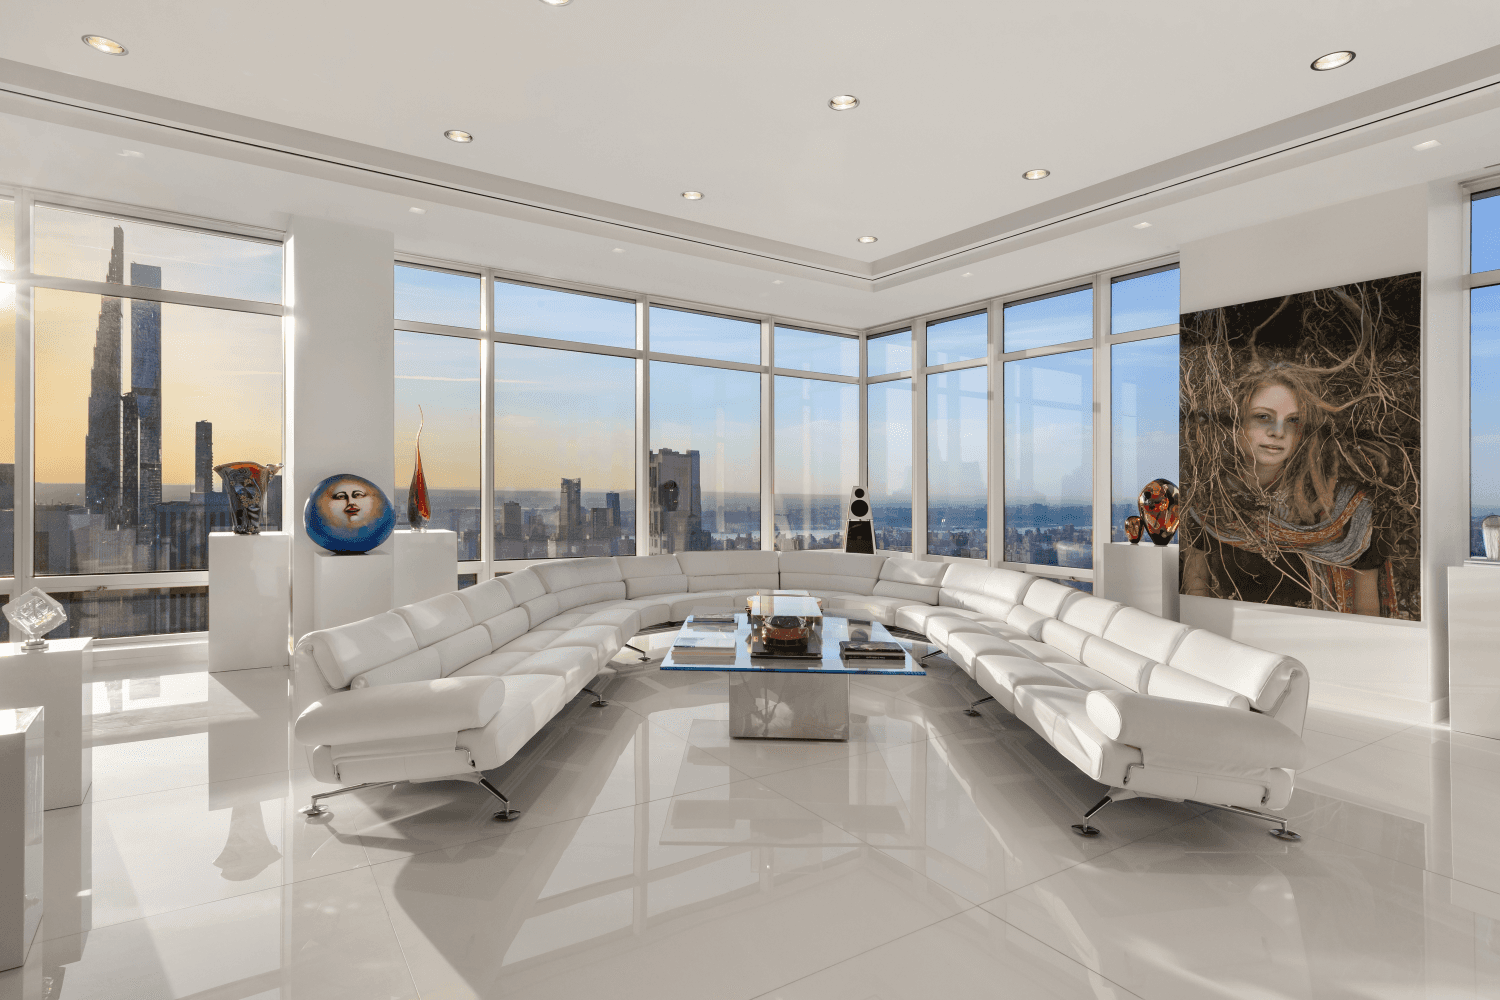 151 East 58th Street, PH54WBreathtaking Views at One of the Most Impressive Penthouses on the Doorstep of Billionaires' Row, with Central Park, MoMA, Rockefeller Center, and Fifth Avenue just moments ...